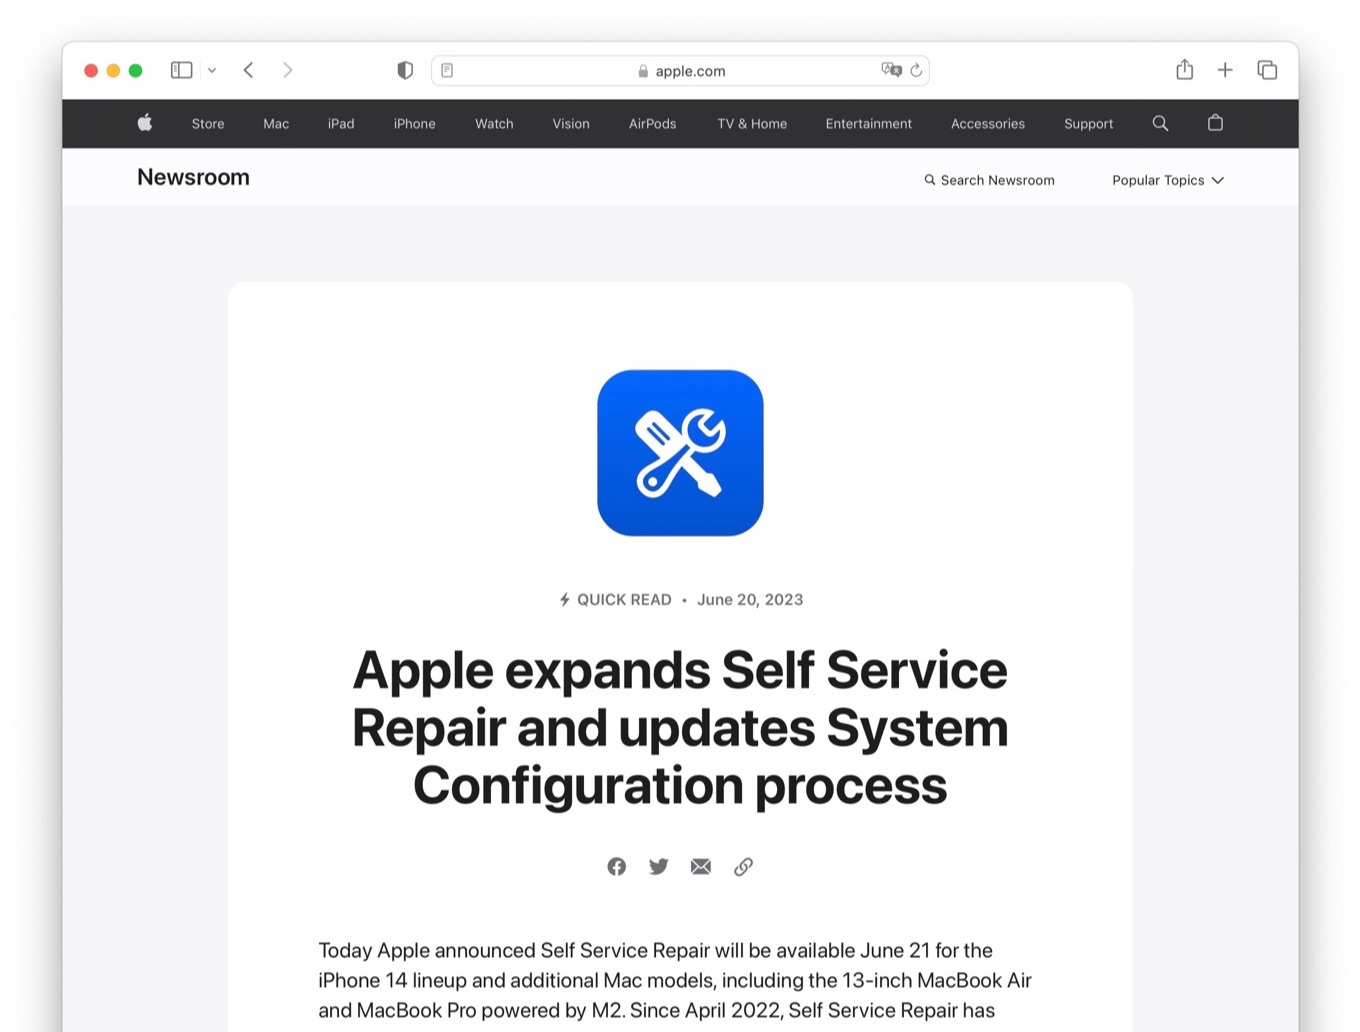 Apple expands Self Service Repair and updates System Configuration process